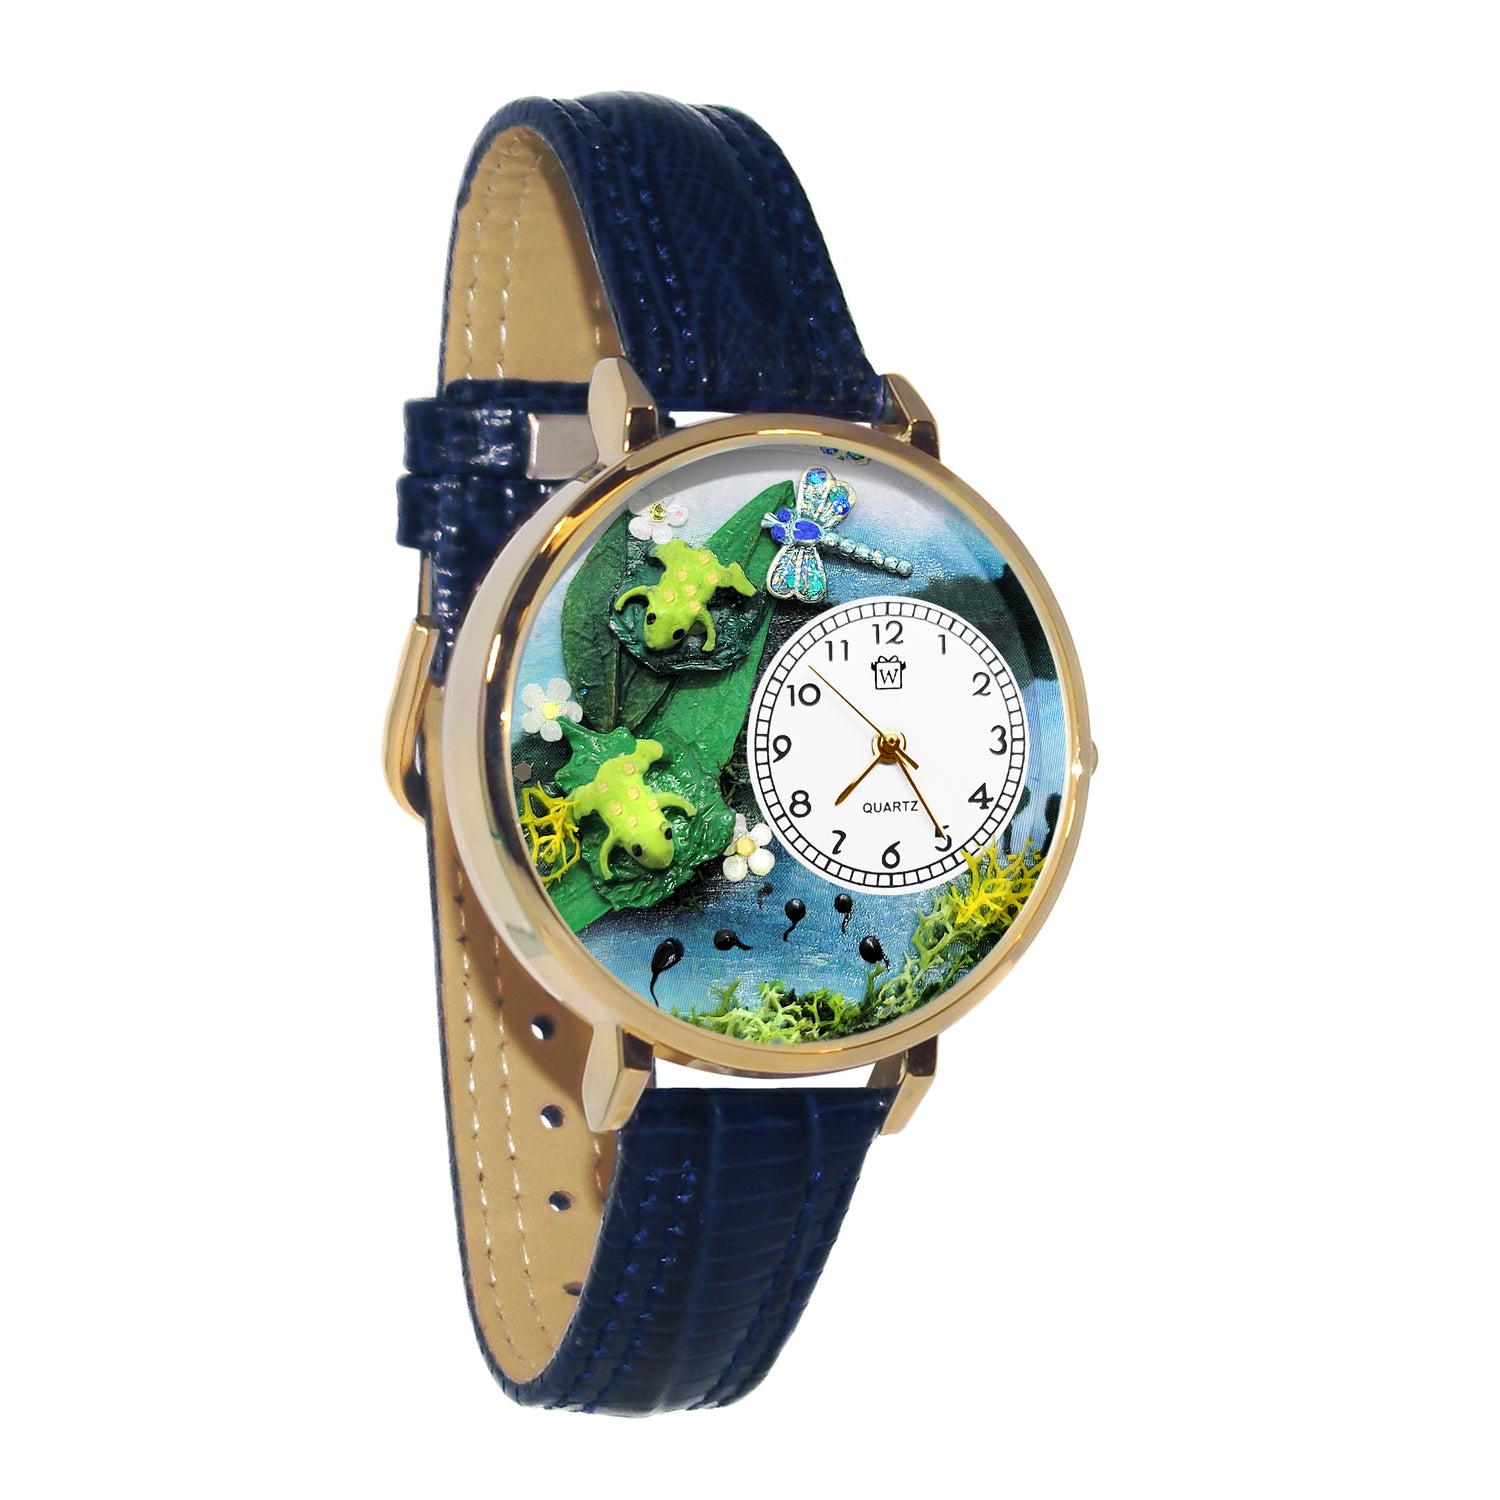 Whimsical Gifts | Frogs 3D Watch Large Style | Handmade in USA | Animal Lover | Outdoor & Garden | Novelty Unique Fun Miniatures Gift | Gold Finish Navy Blue Leather Watch Band